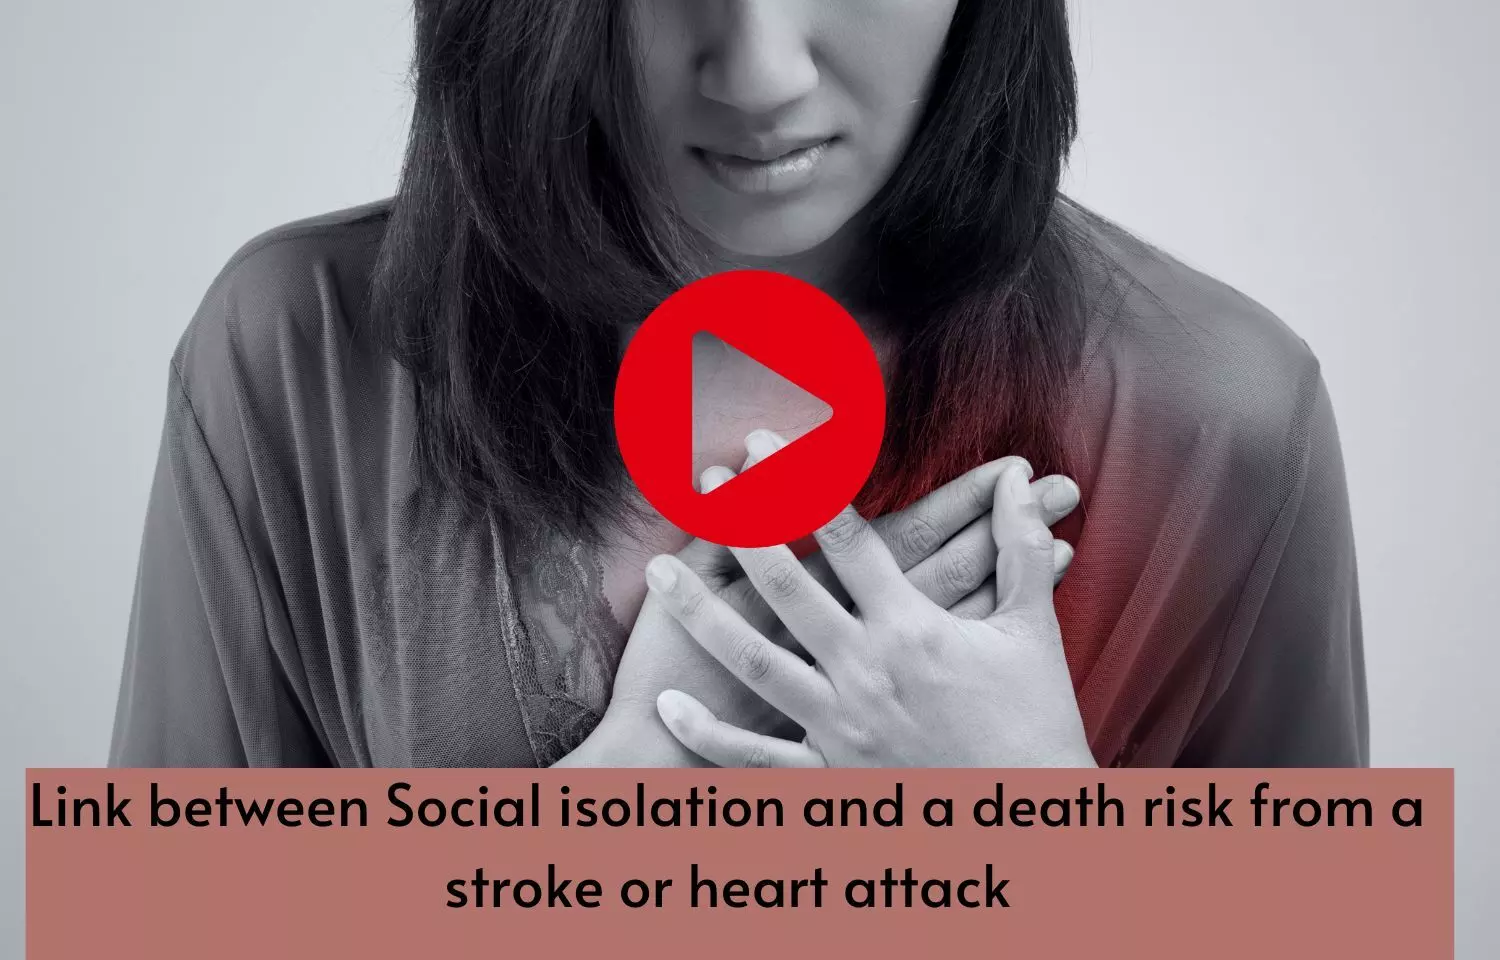 Link between Social isolation and a death risk from a stroke or heart attack